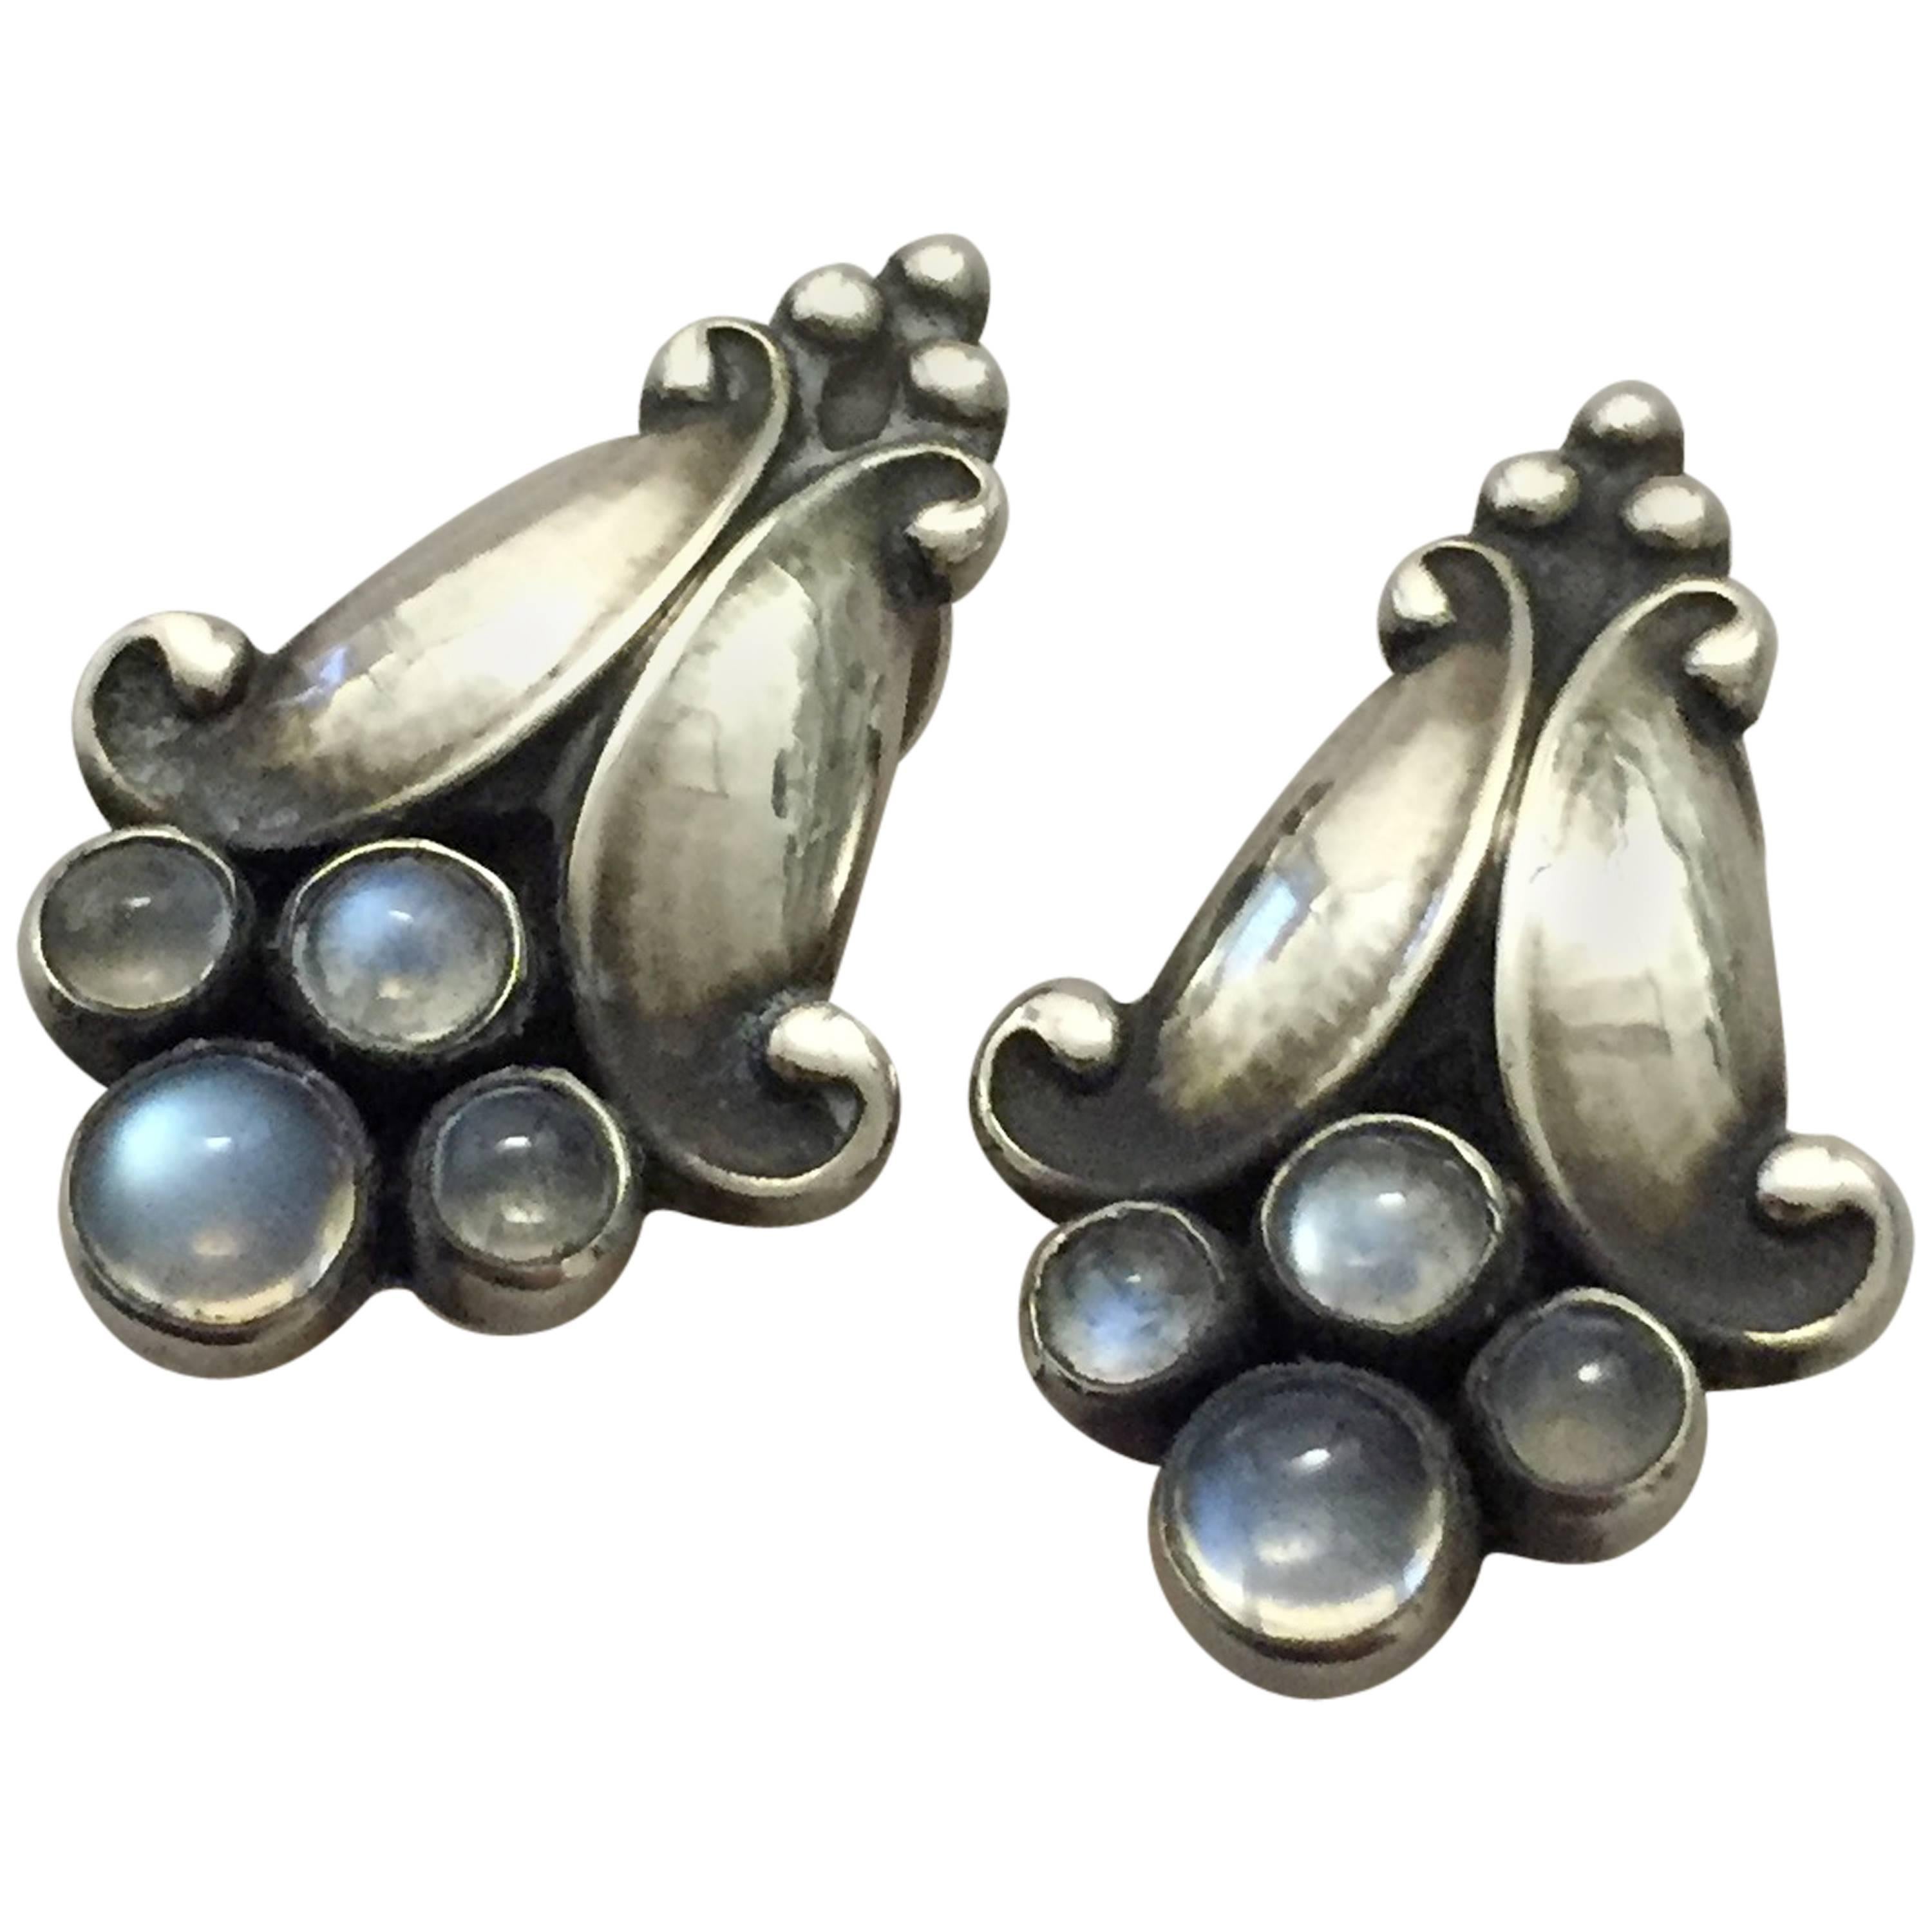 Georg Jensen Sterling Silver and Moonstones Earclips